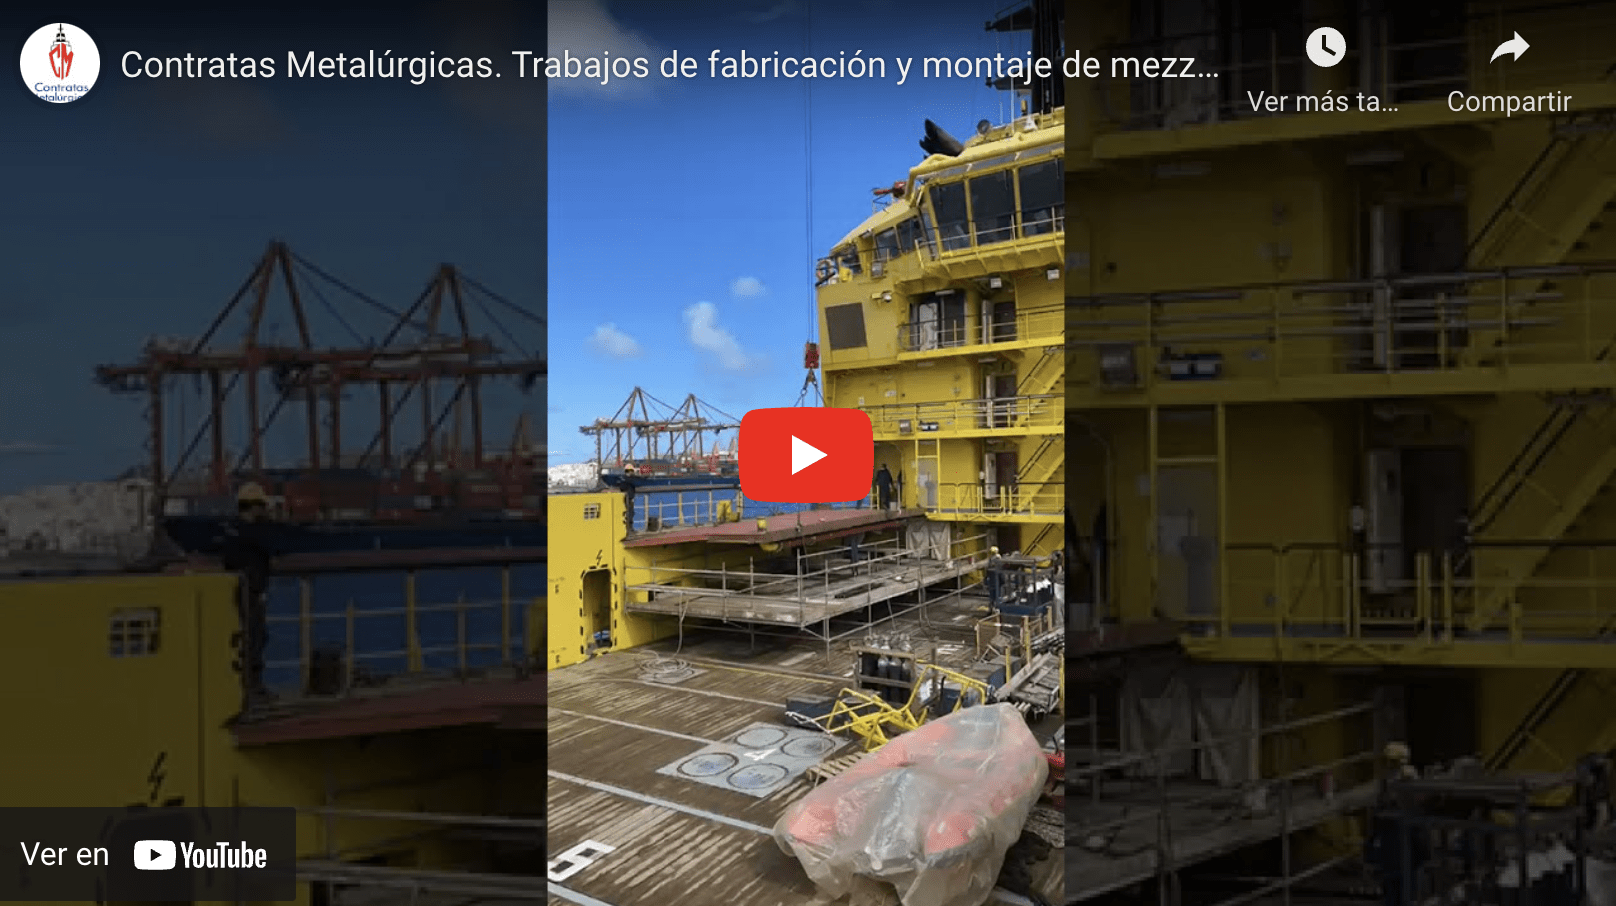 manufacturing and assembly of mezzanine in OOC Saphire Vessel